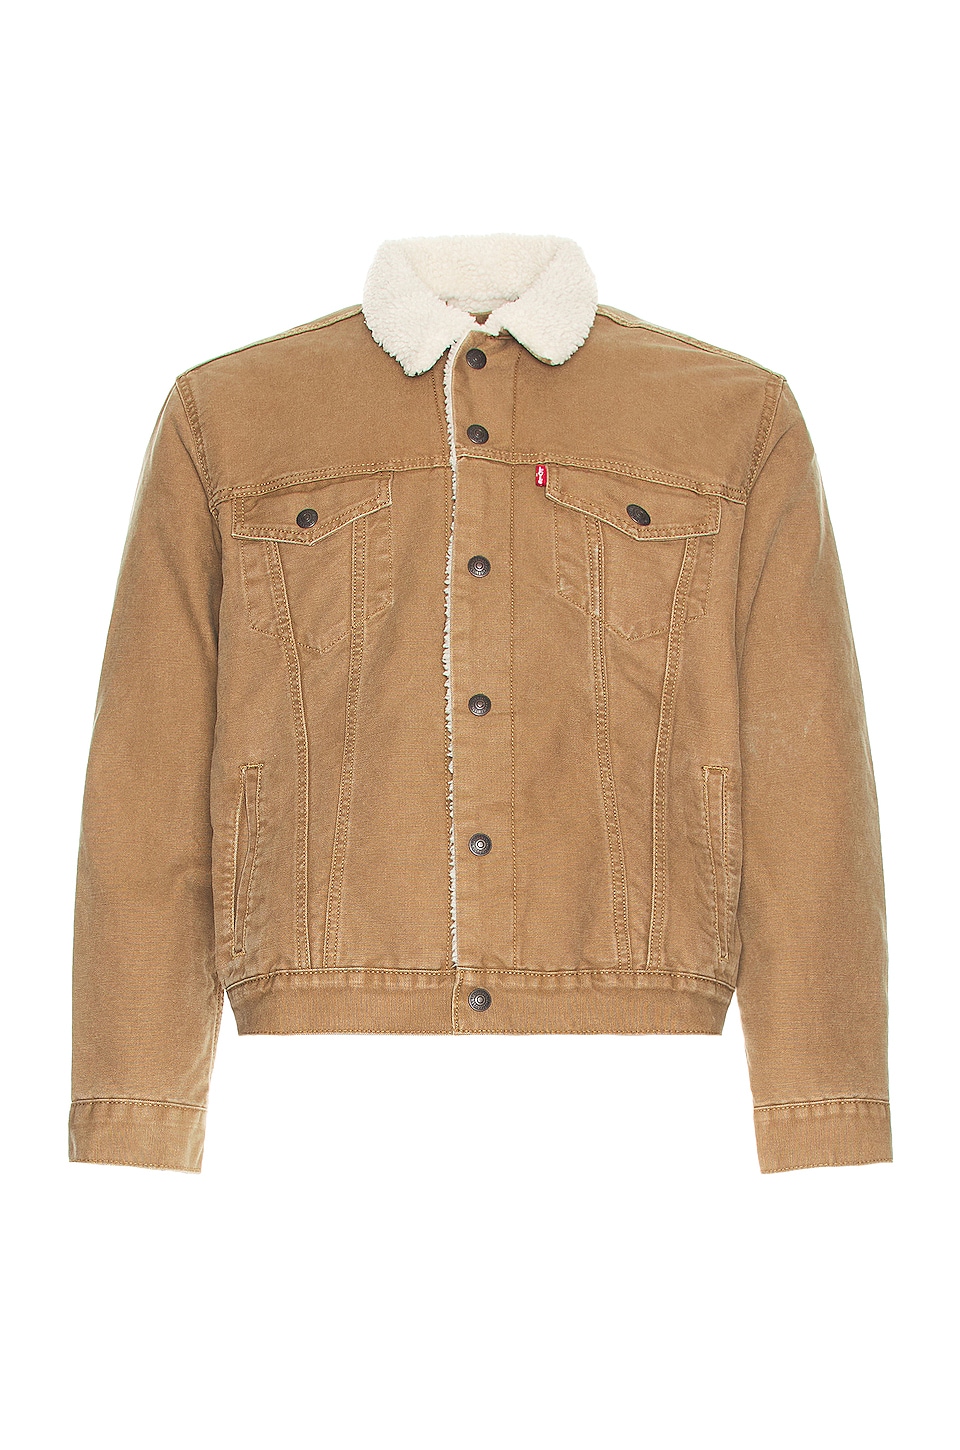 LEVI'S Type 3 Sherpa Canvas Trucker in Washed Cougar | REVOLVE